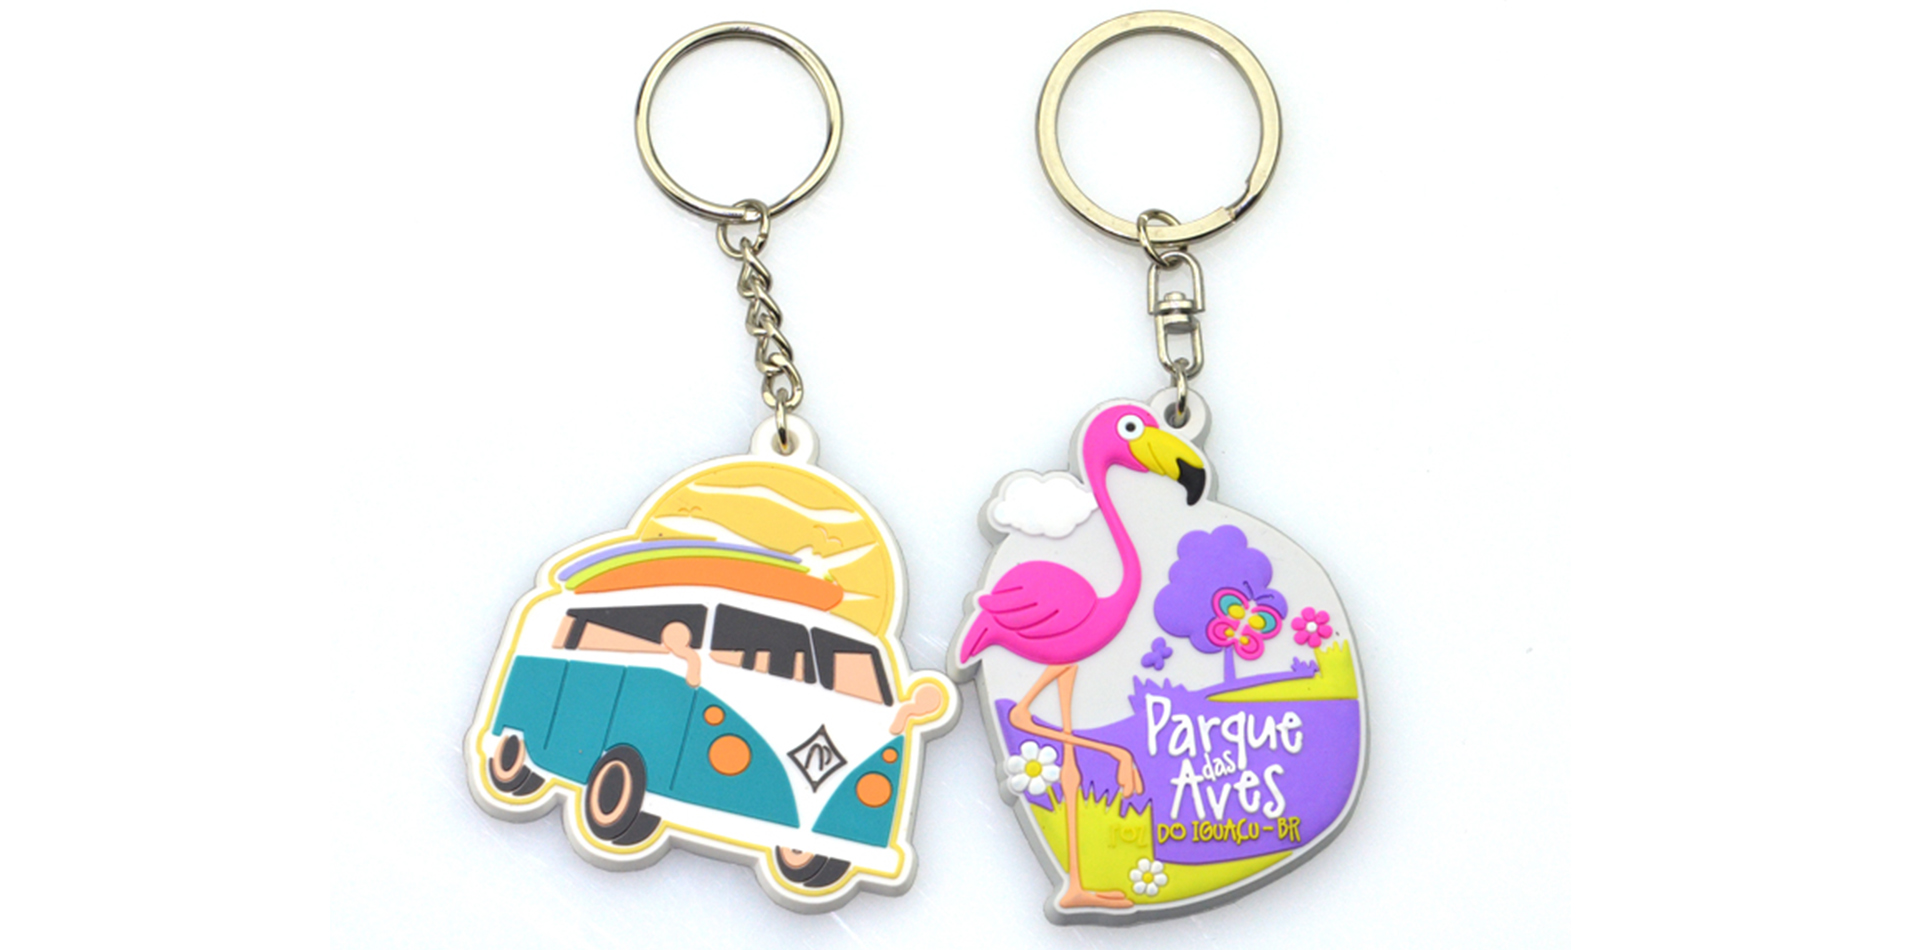 What are PVC keychains?